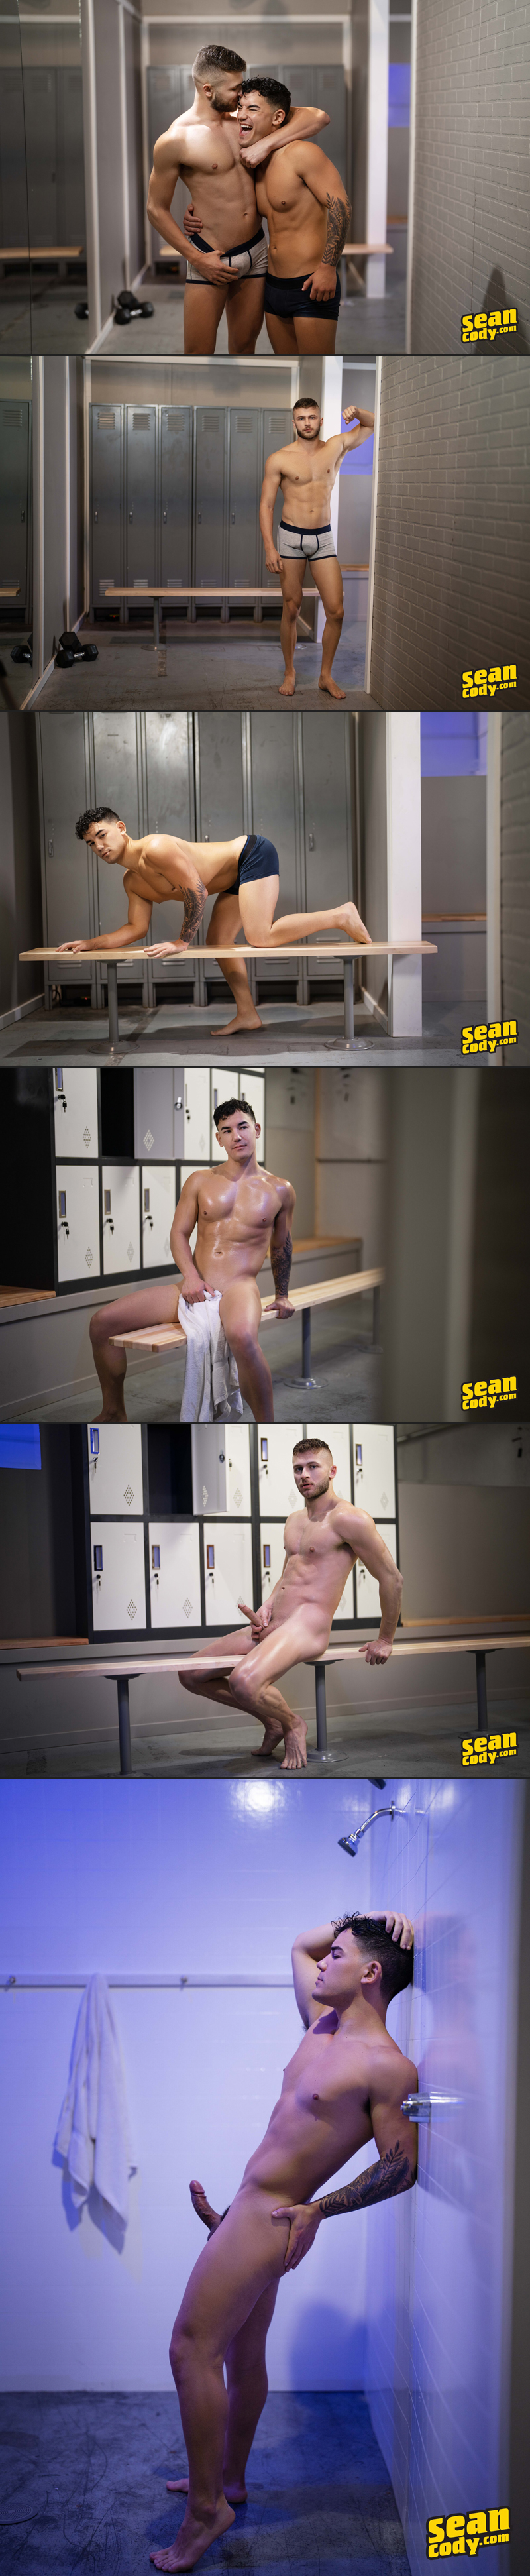 The Gym: Episode 1 (Devy, JC, Josh and The Return Of Stu) at SeanCody